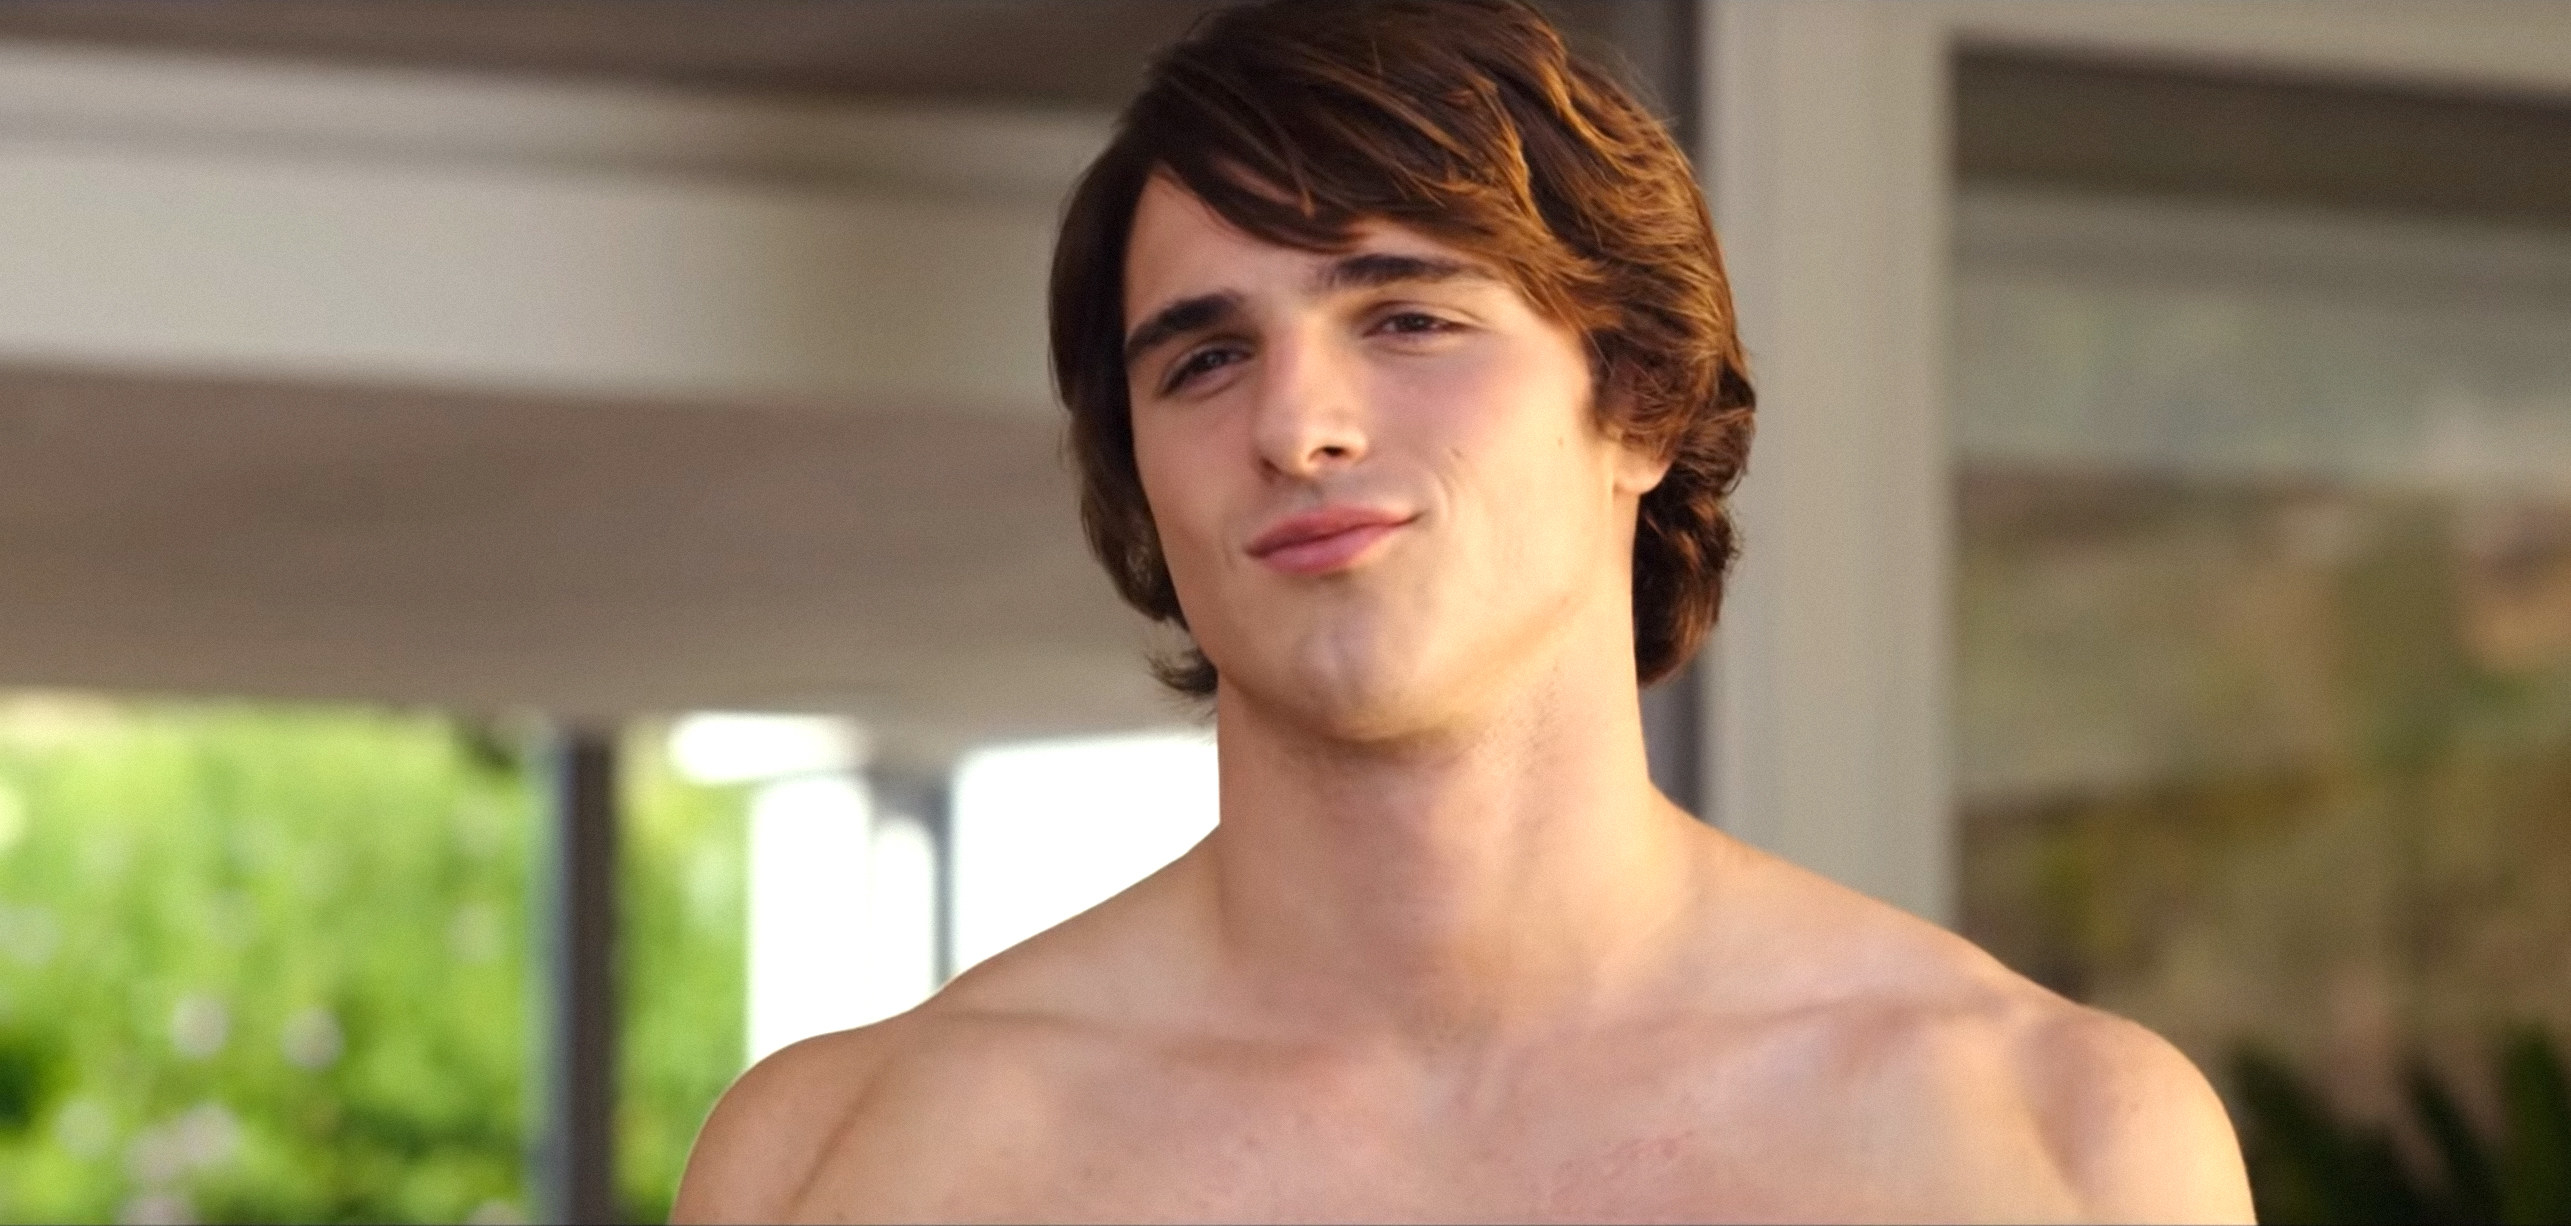 Actor Jacob Elordi bare-chested as Noah Flynn from The Kissing Booth